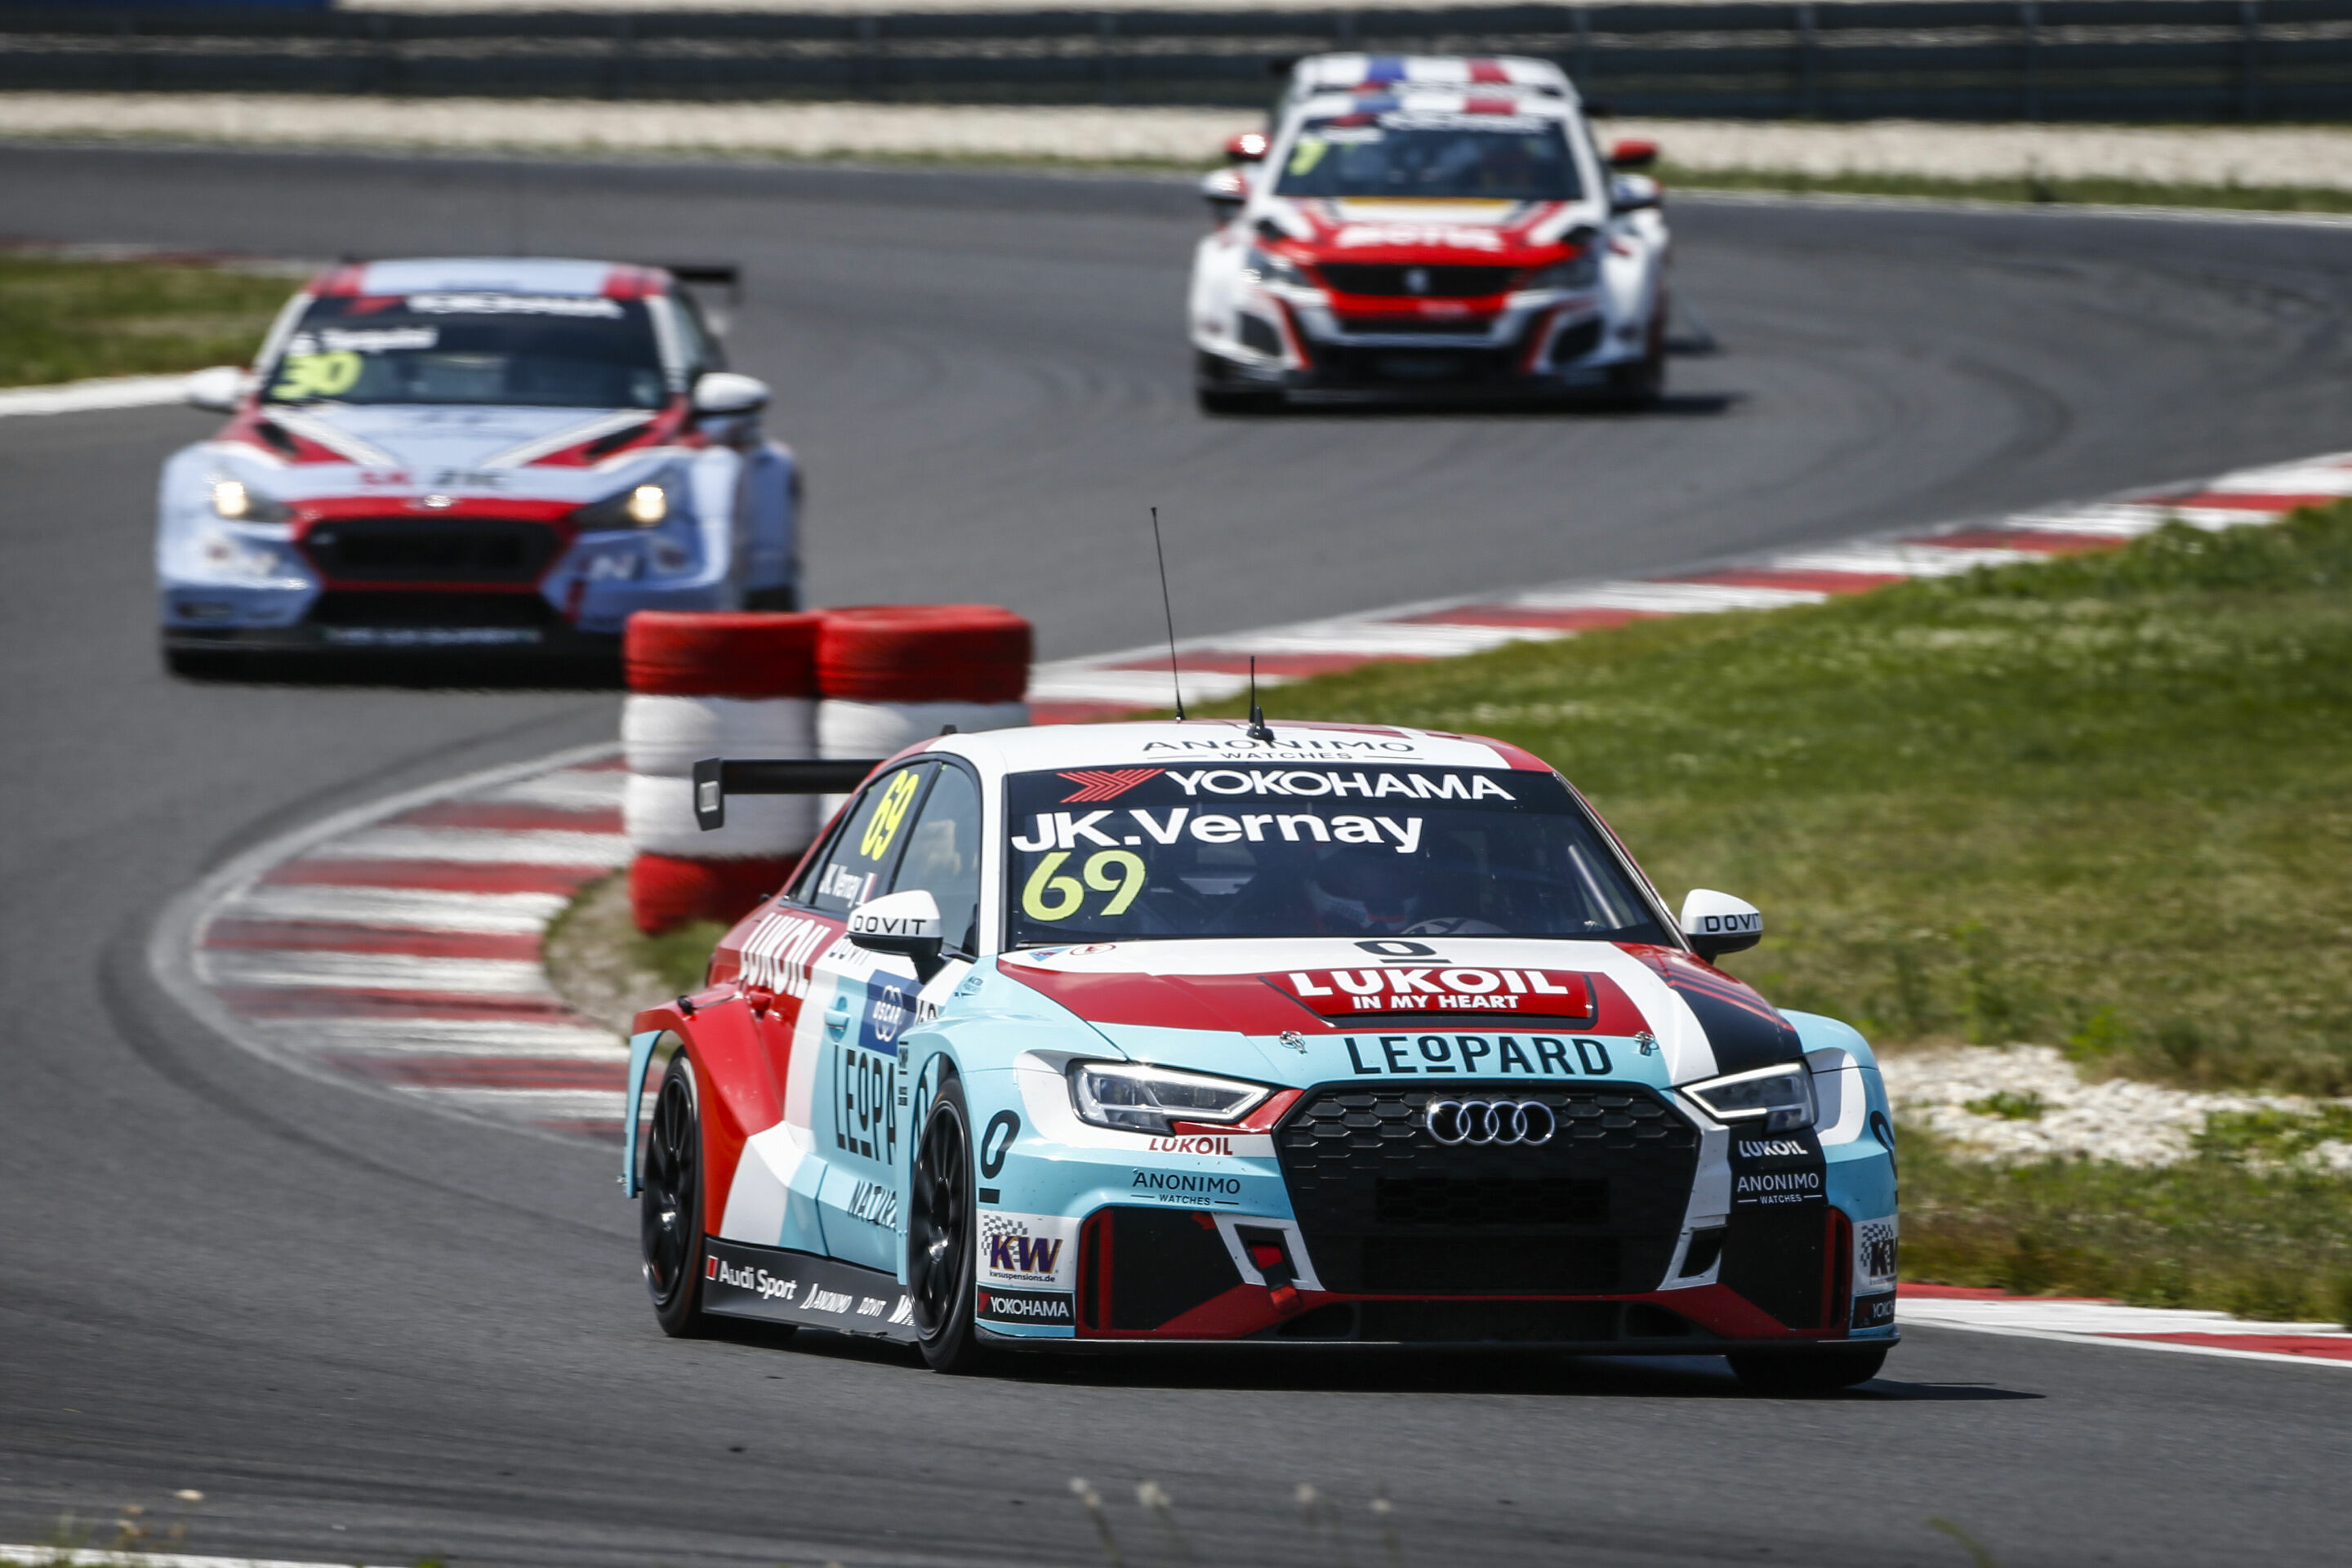 WTCR – FIA World Touring Car Cup 2018